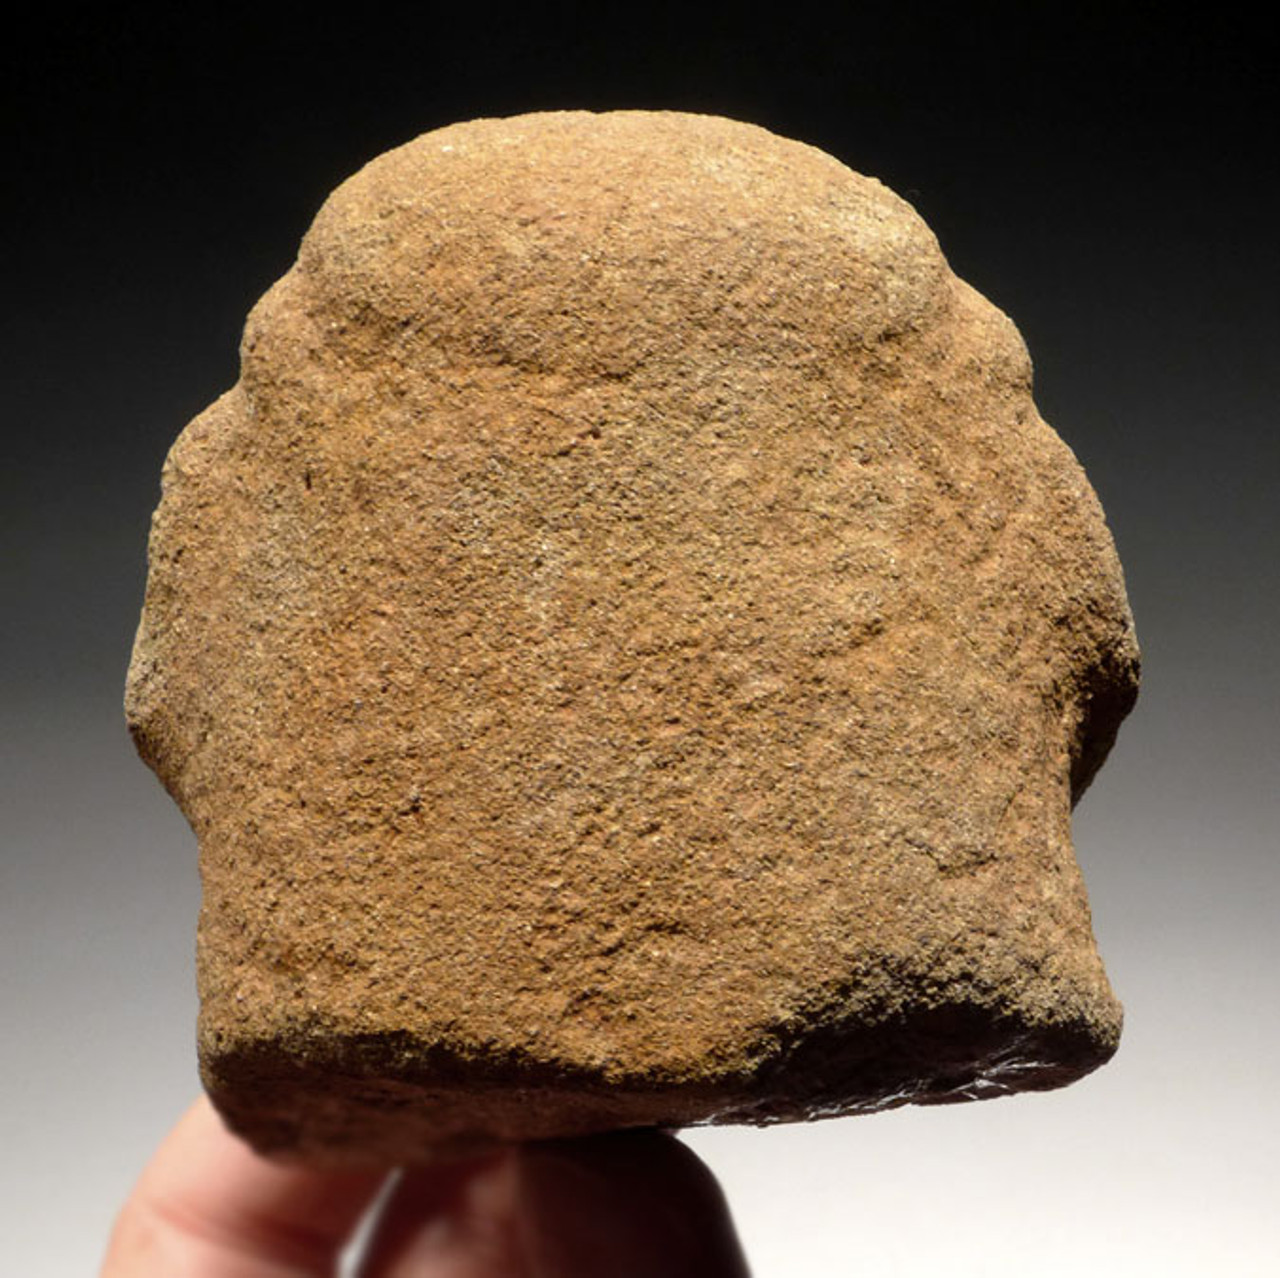 PC202 - PRE-COLUMBIAN STONE CARVED HEAD FROM CENTRAL AMERICA